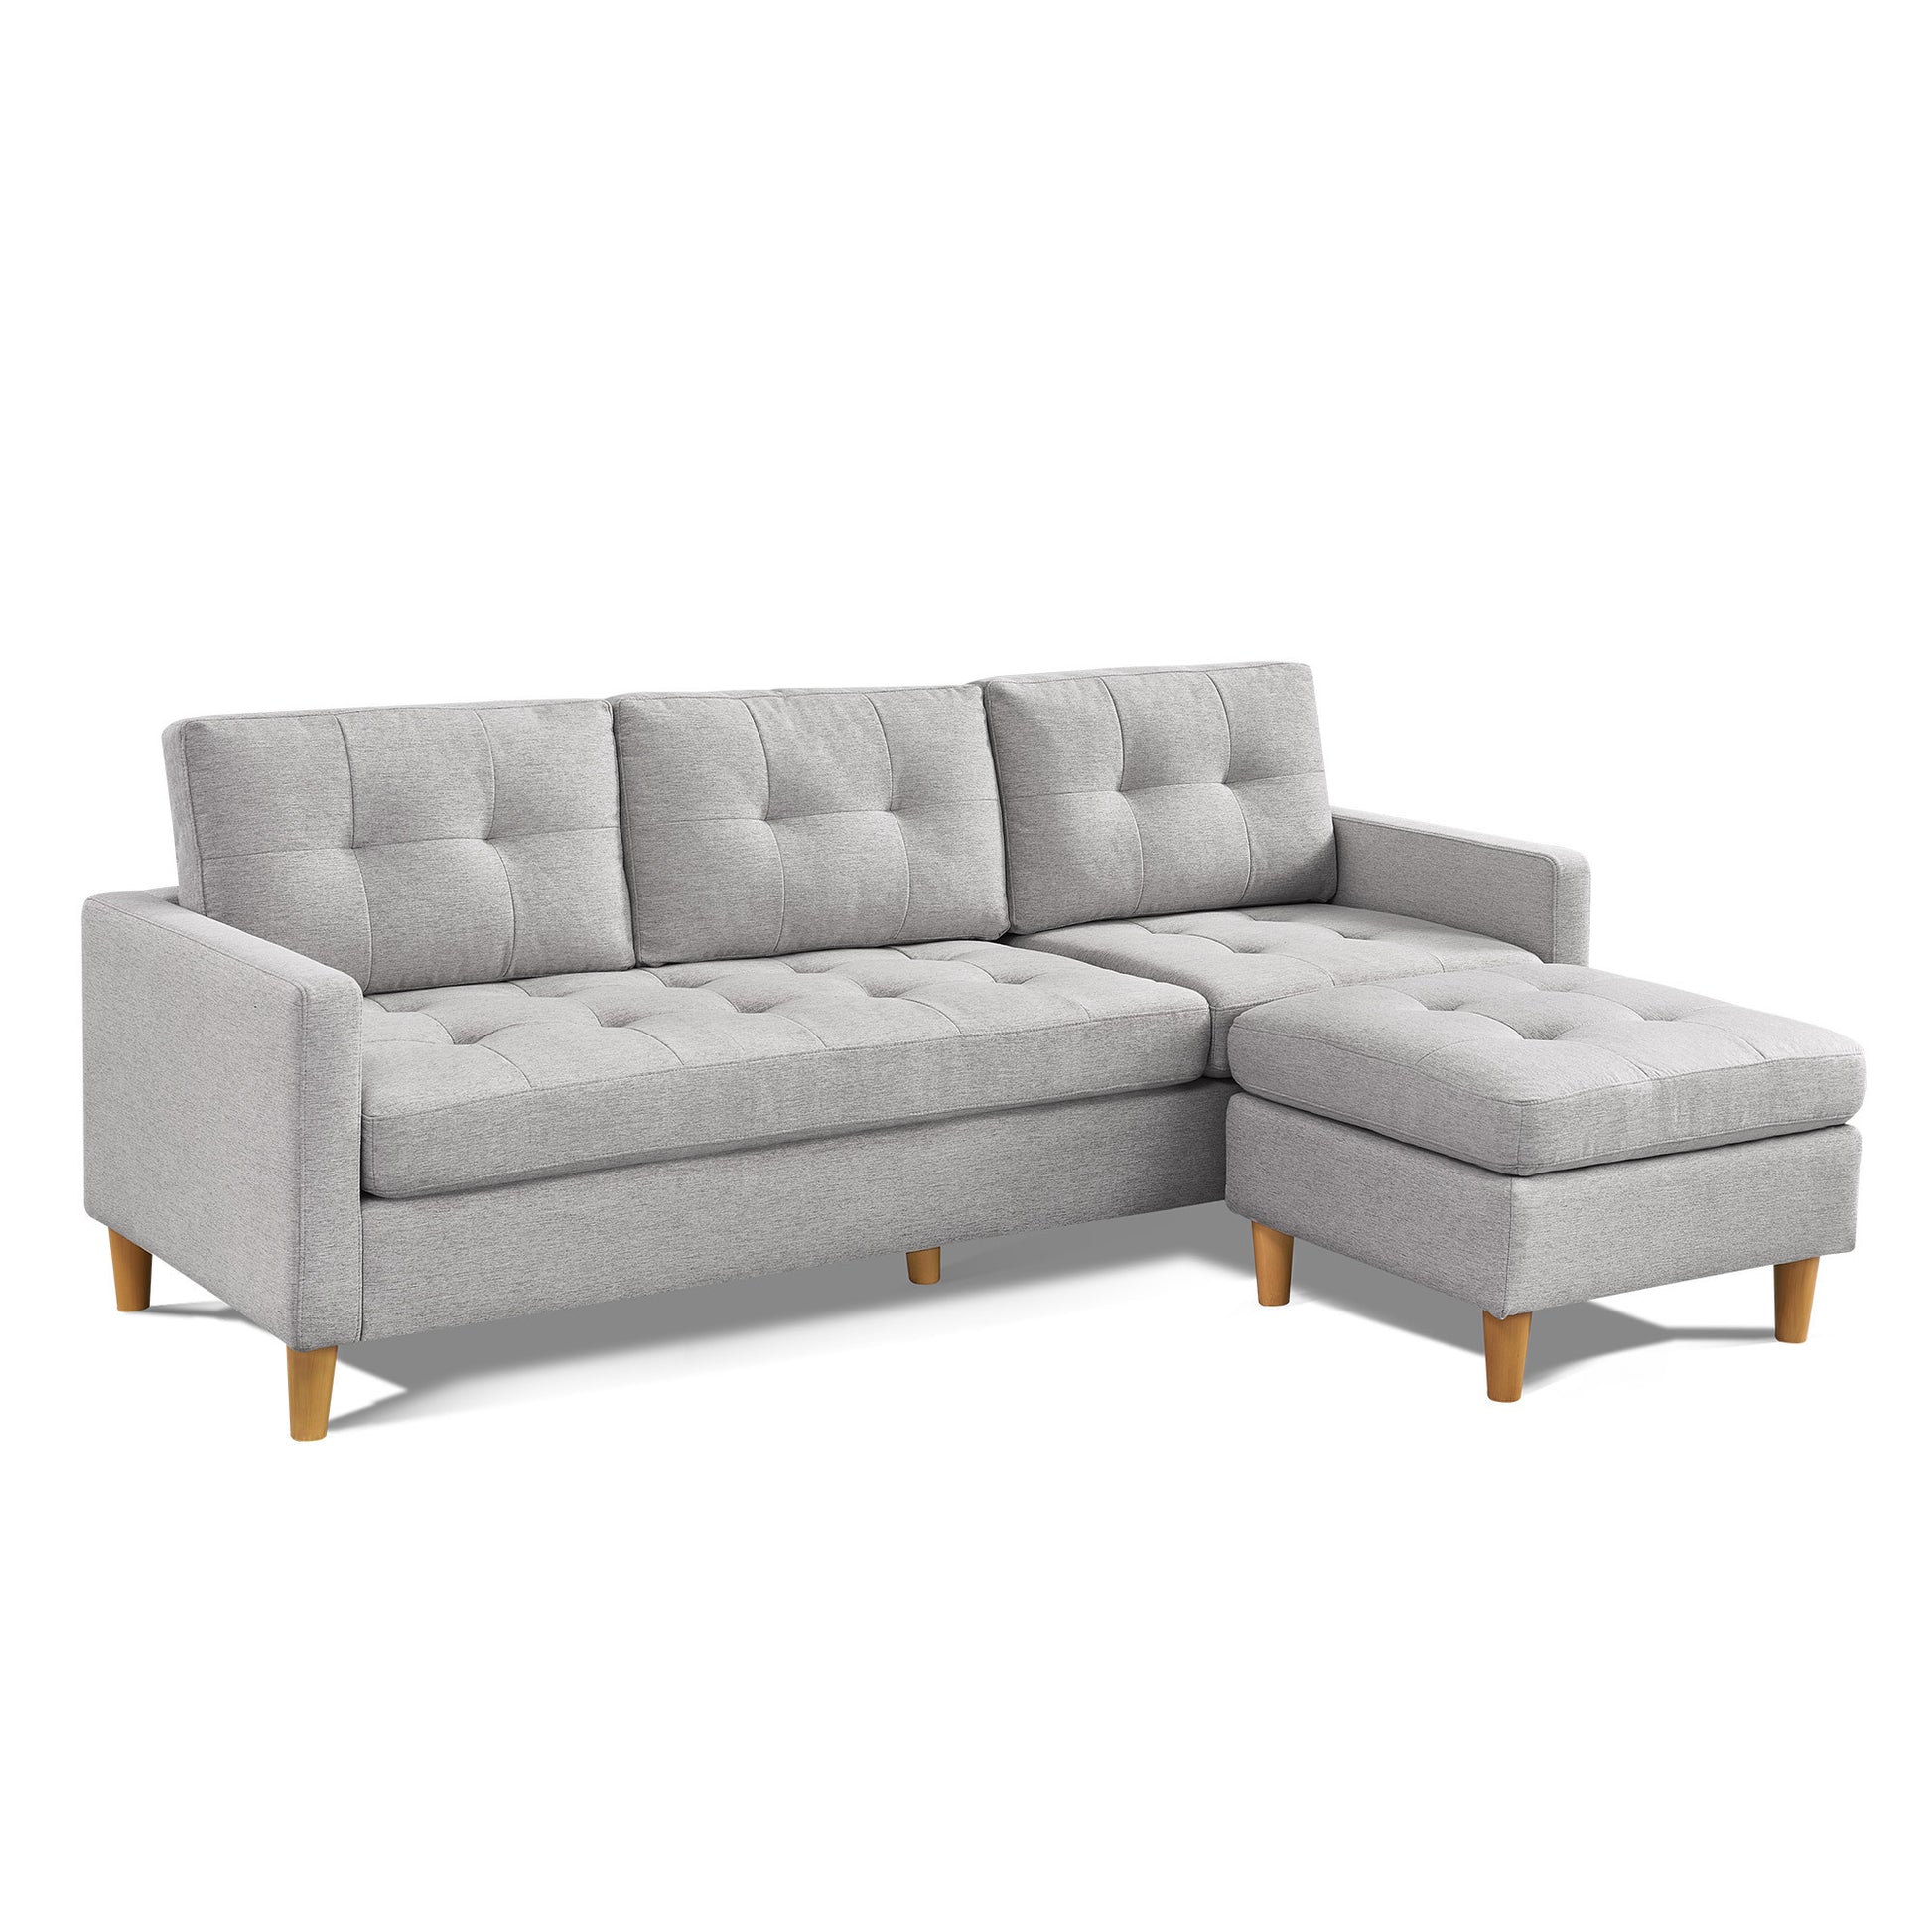 87 Inches  Wide Modern  Convertible Sectional Sofa & Chaise, L Shaped Tufted Fabric Couch, Reversible Sectional Sofa with Ottoman - Light Grey - Enova Luxe Home Store